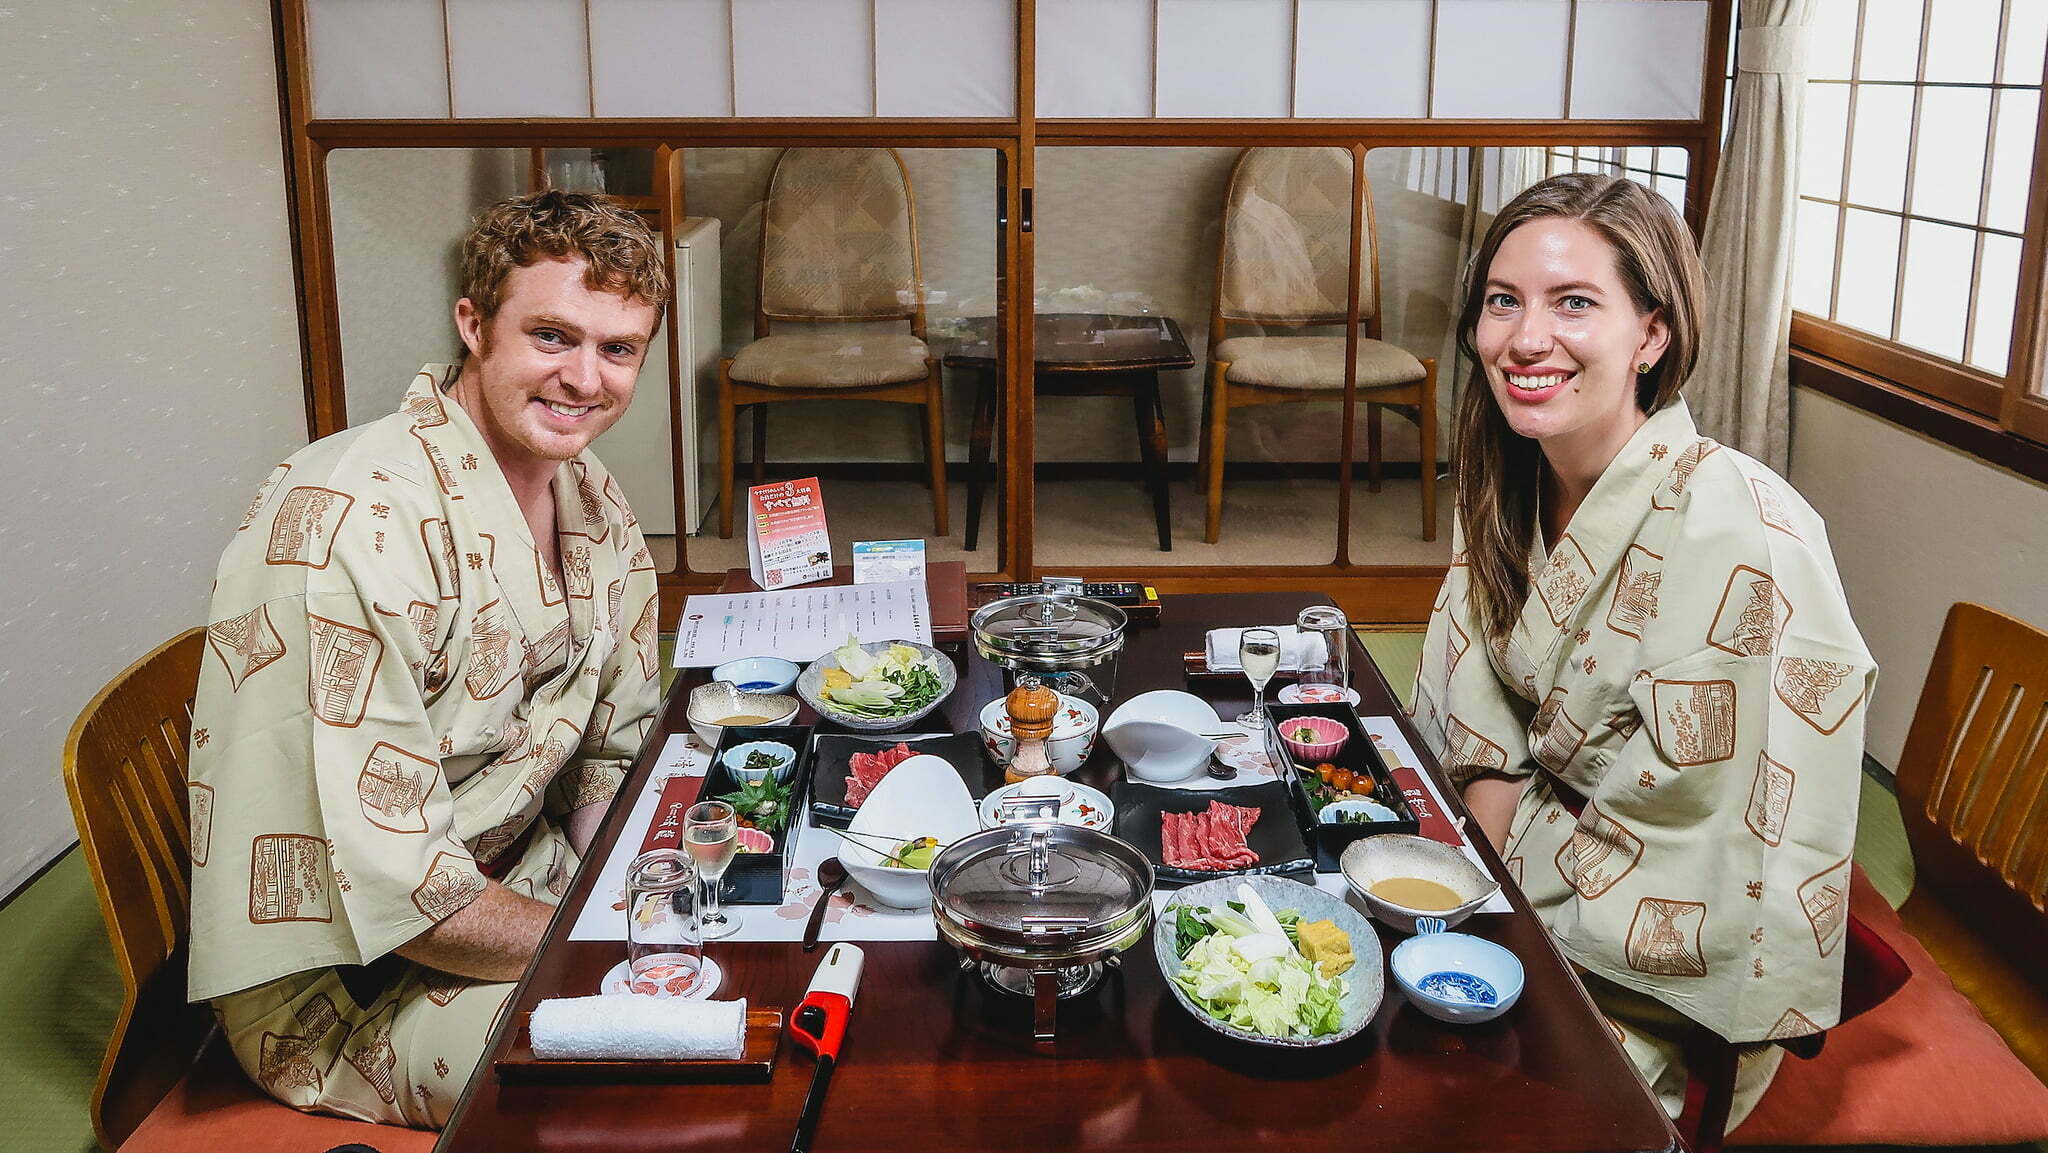 What Do You Care Most About As An Investor? For me! It's All About Capital Efficiency Baby! Eating a Ryokan meal with Audrey in Japan